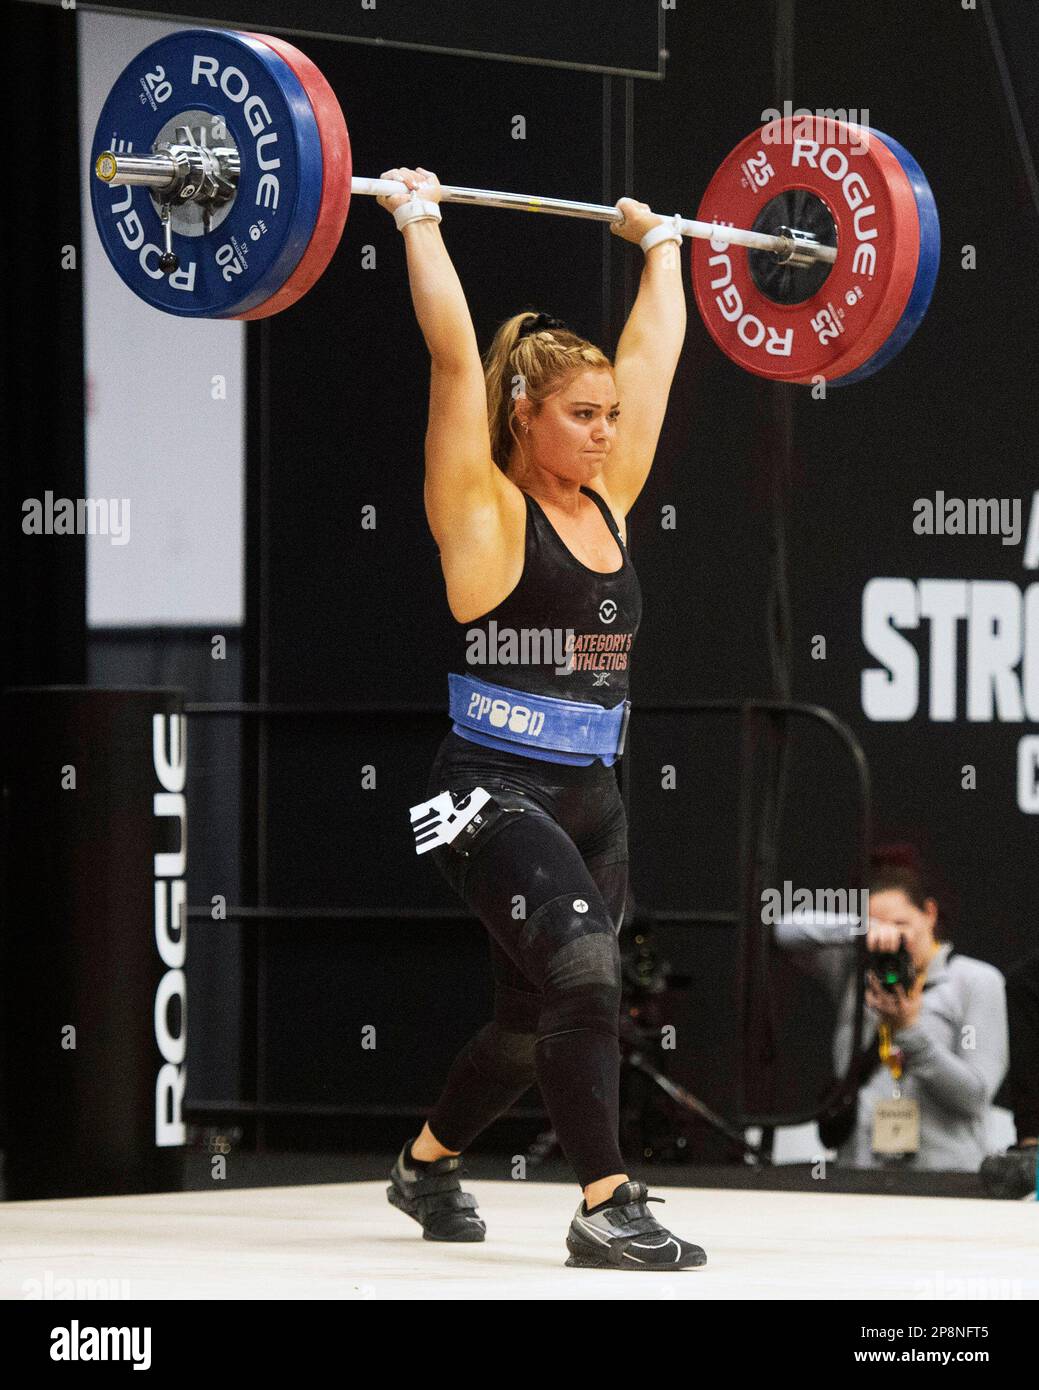 Columbus, Ohio, United States. 3th Mar, 2023. Alexa Gonzalez lifts 110kgs in the clean and jerk in the Women's 76kg class at the Rogue Stage in Columbus, Ohio, USA. Credit: Brent Clark/Alamy Live News Stock Photo